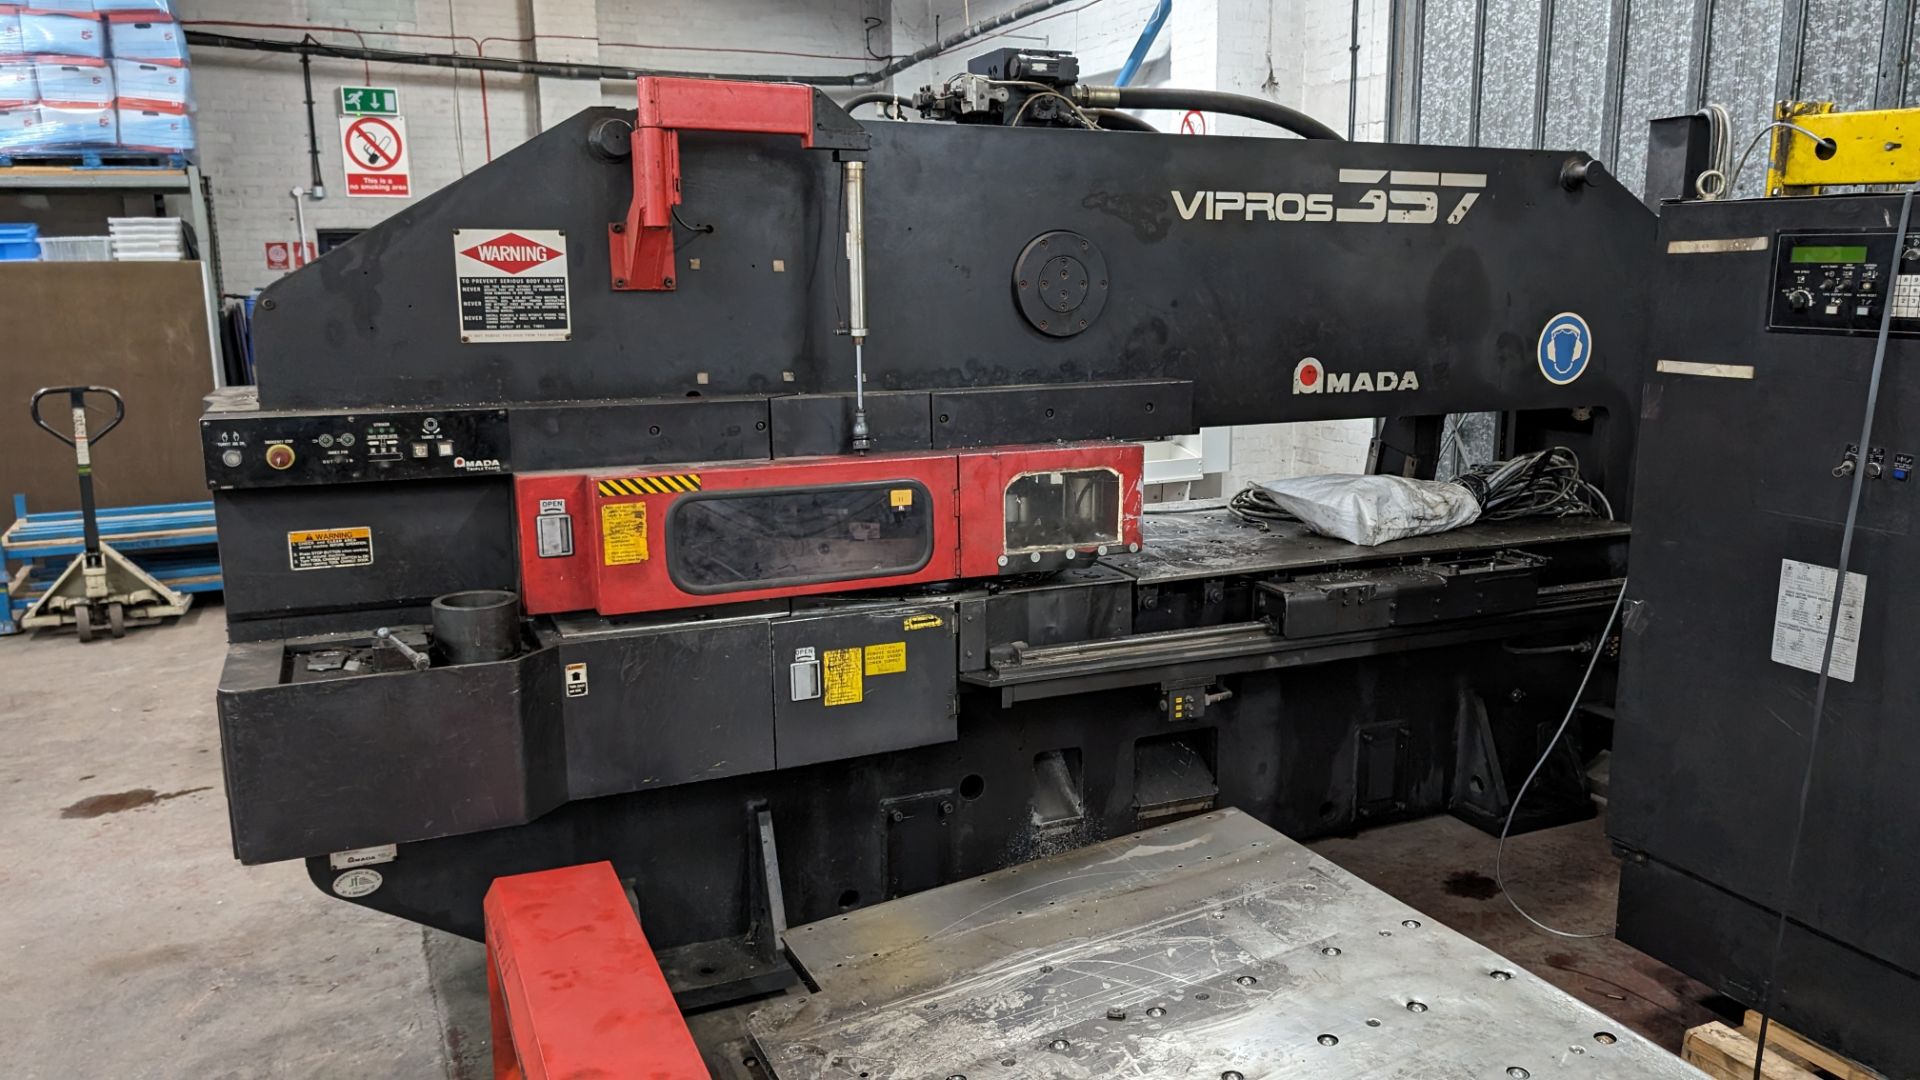 1995 Amada Vipros 357 NC turret punch press, 45 turret stations, 30 ton capacity, serial number 3571 - Image 4 of 51